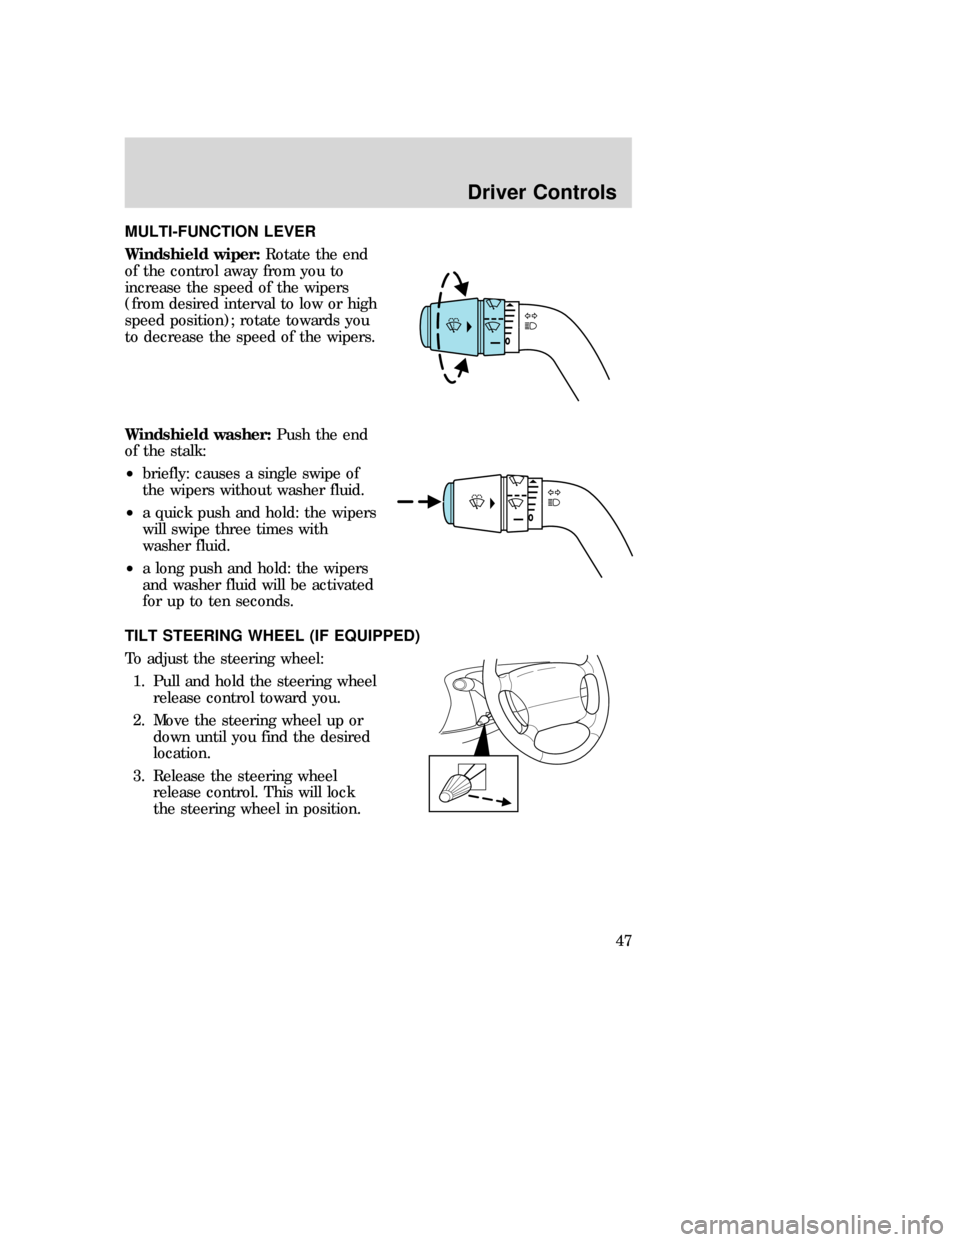 MAZDA MODEL B-SERIES 2006   (in English) Service Manual MULTI-FUNCTION LEVER
Windshield wiper:Rotate the end
of the control away from you to
increase the speed of the wipers
(from desired interval to low or high
speed position); rotate towards you
to decre